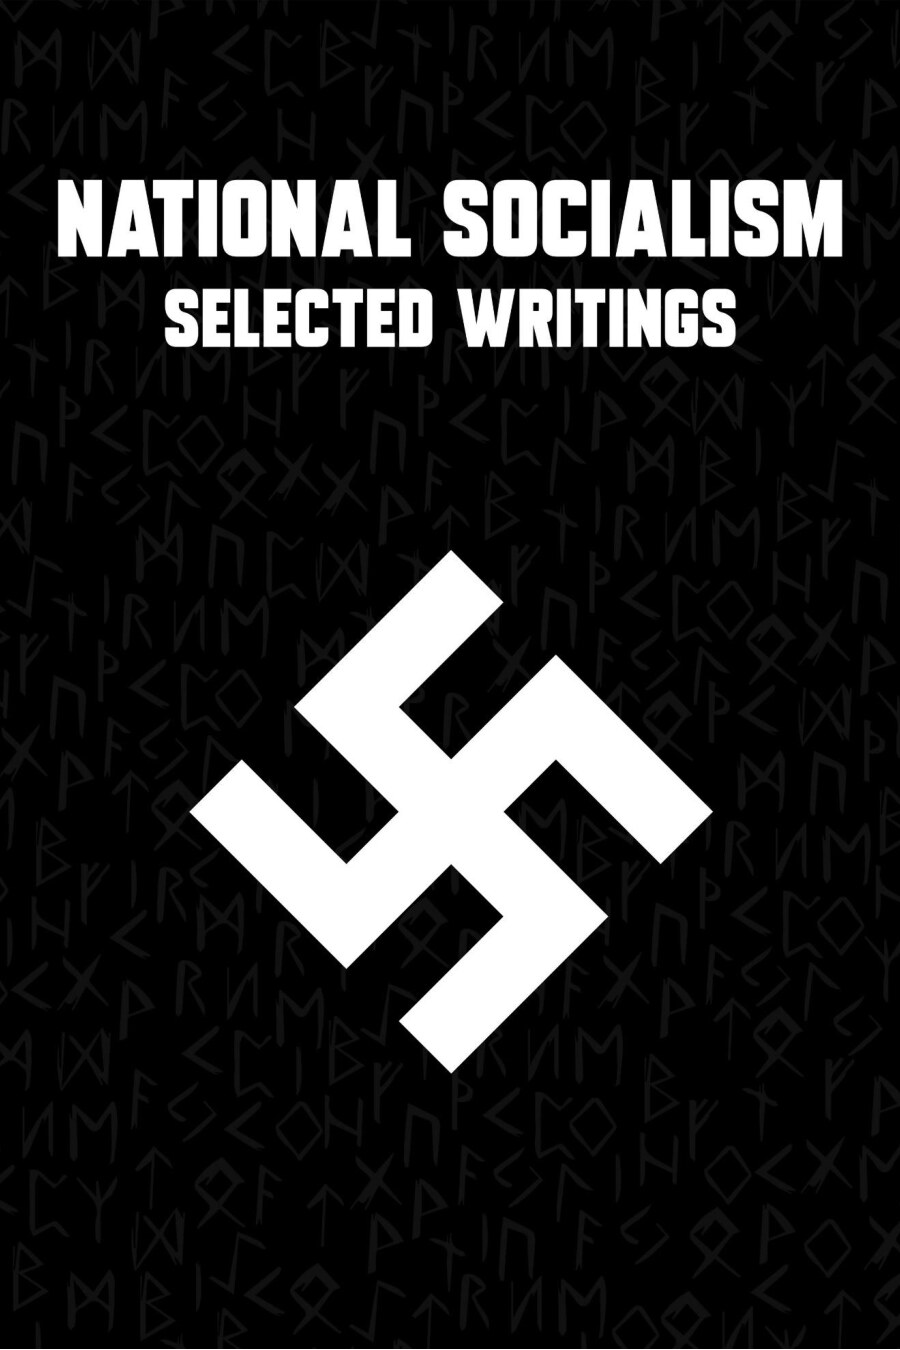 National Socialist Network; National Socialism — Selected Writings